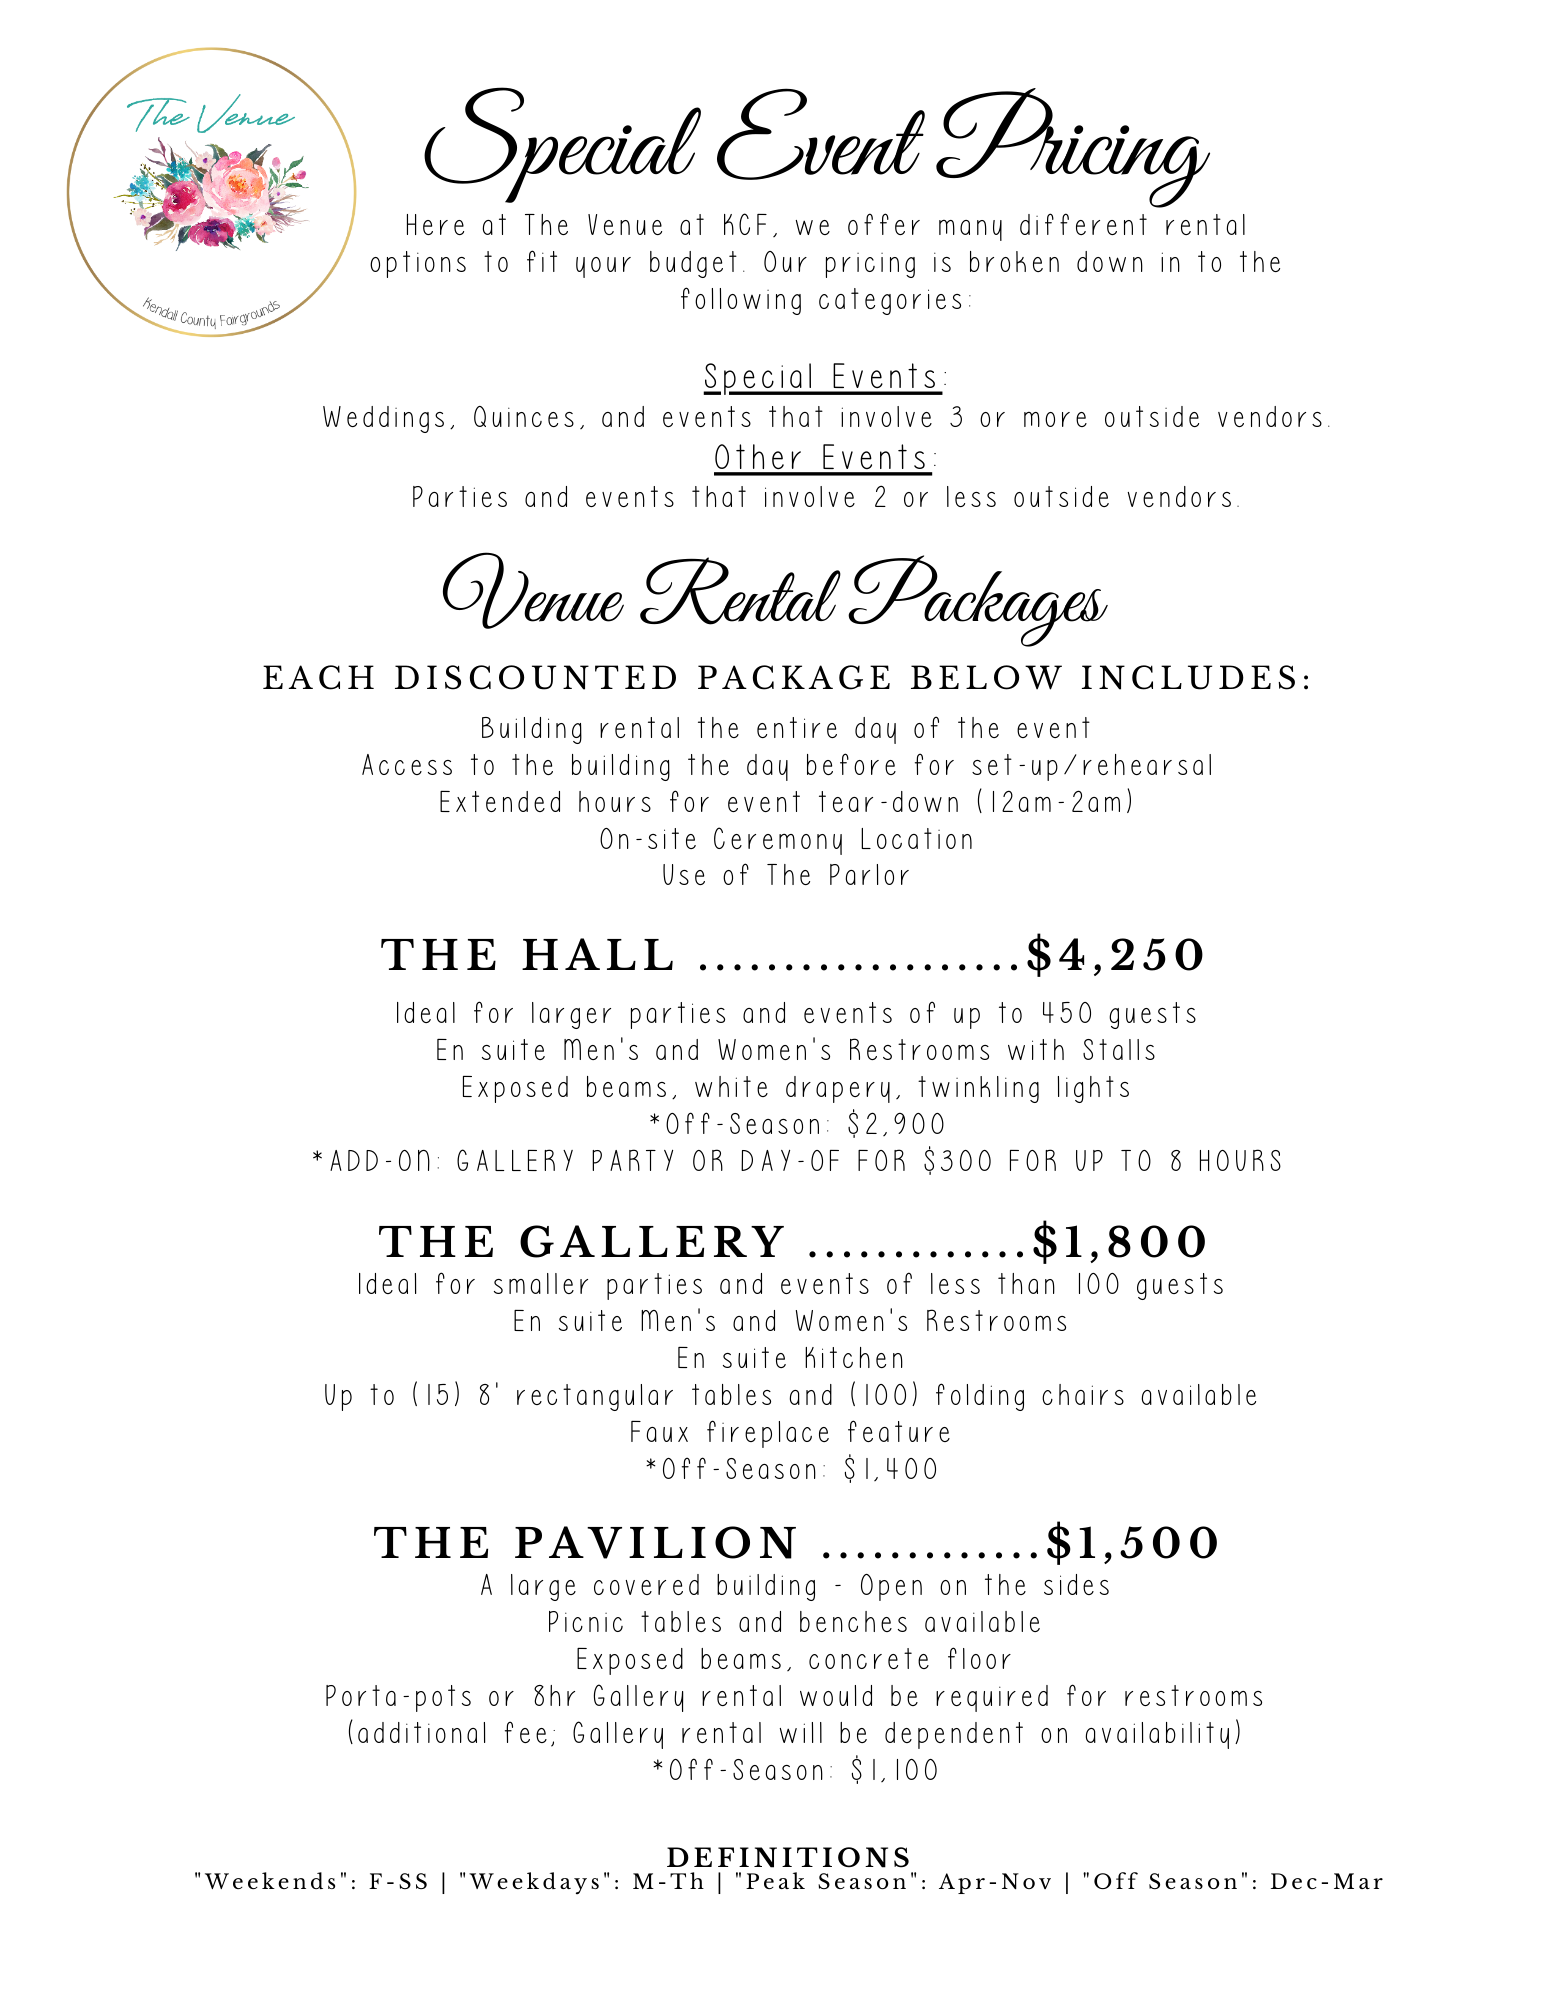 Special Event Packages_page1.png